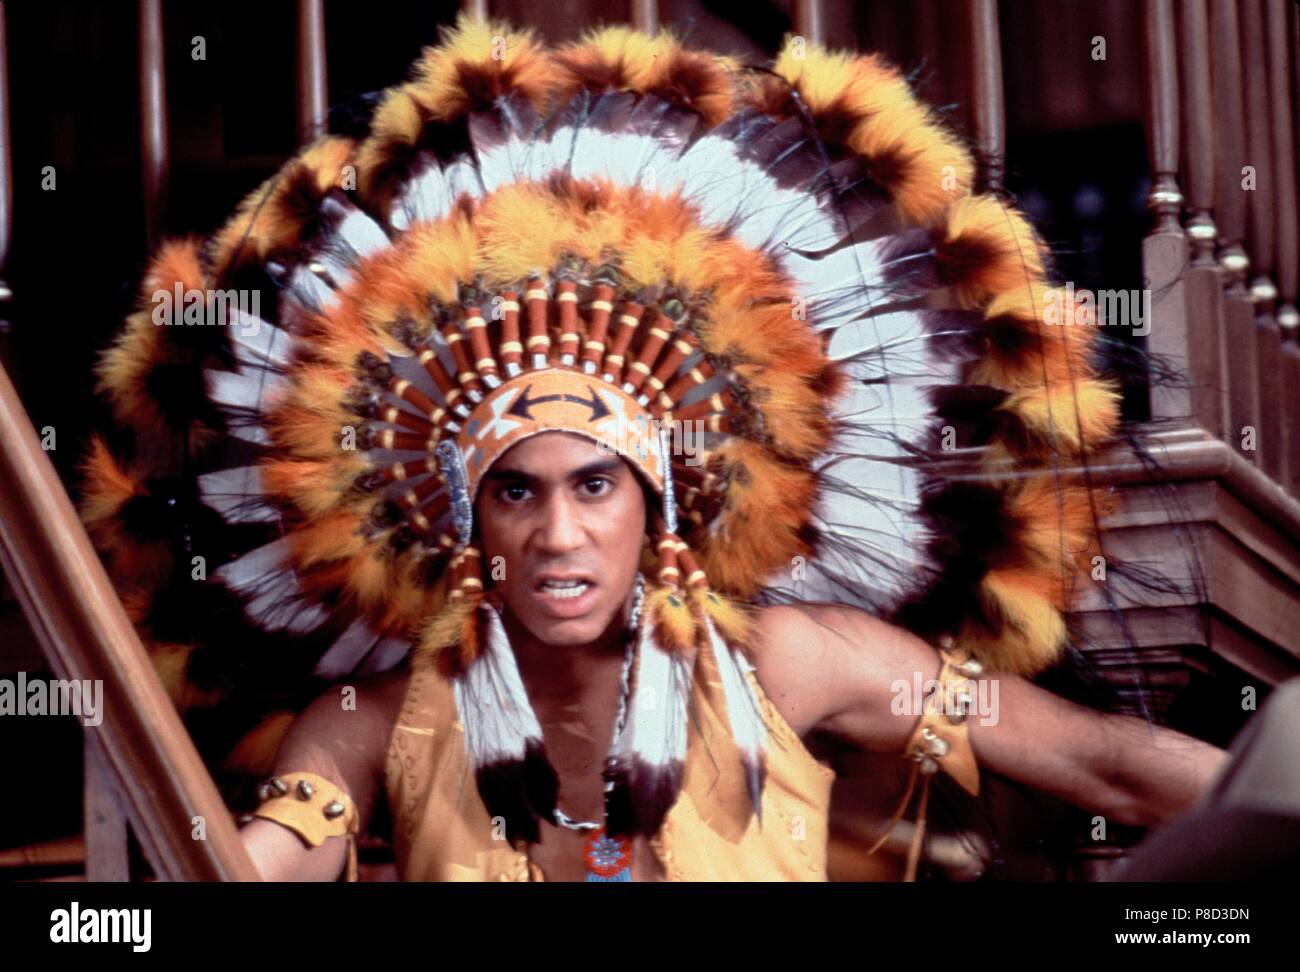 Can't Stop the Music (1982) Village People, Felipe Rose as the Indian     Date: 1980 Stock Photo